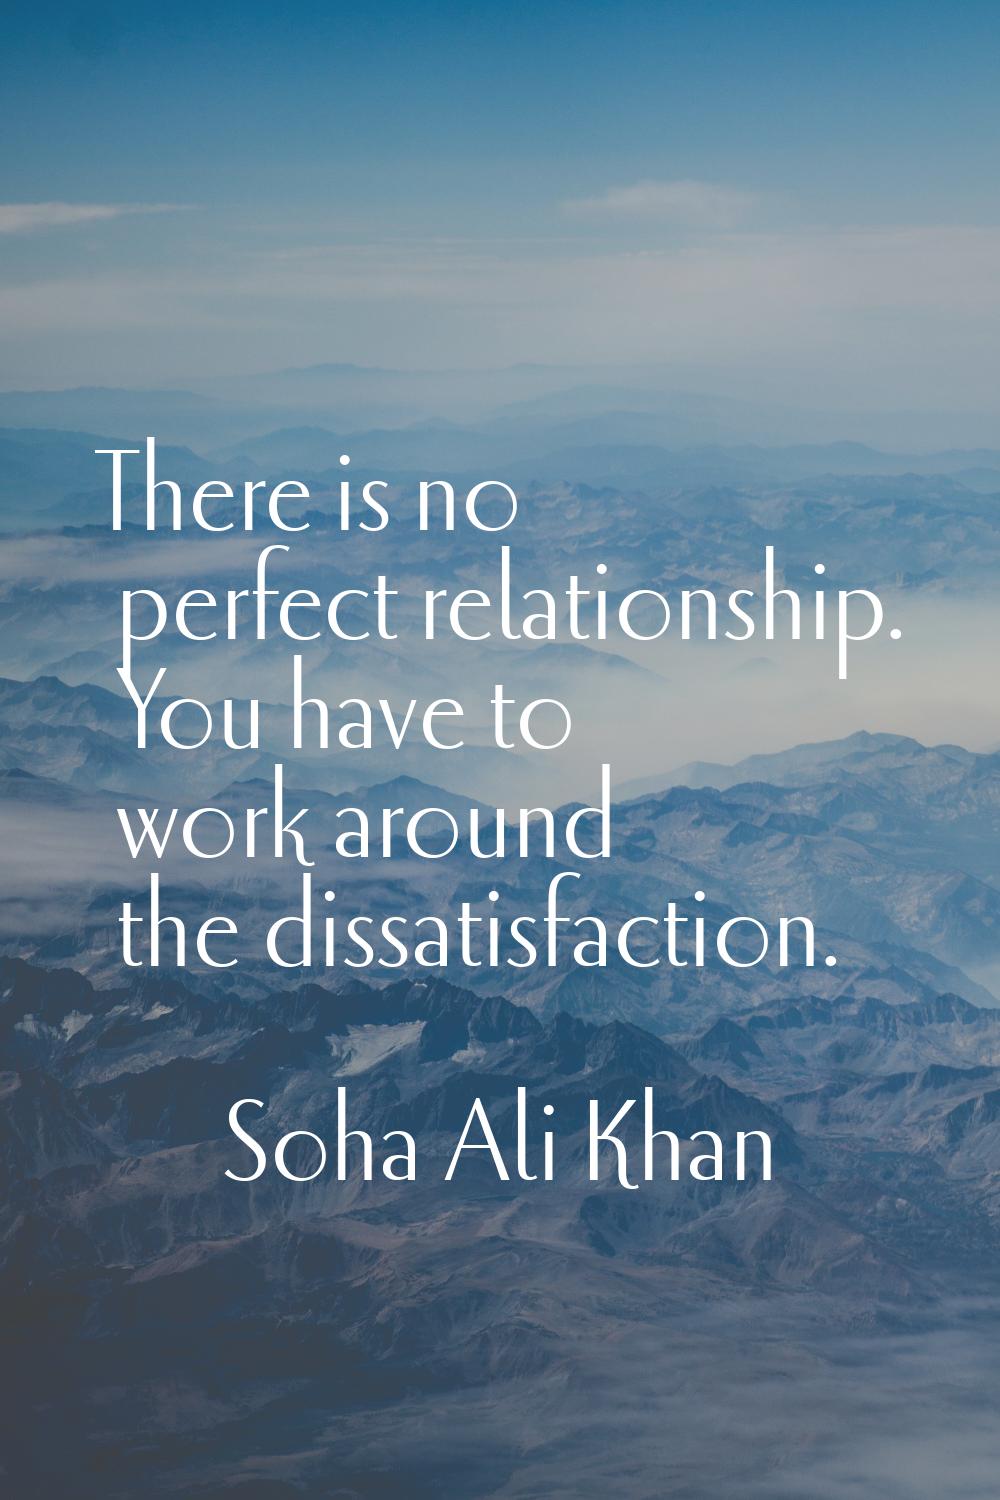 There is no perfect relationship. You have to work around the dissatisfaction.